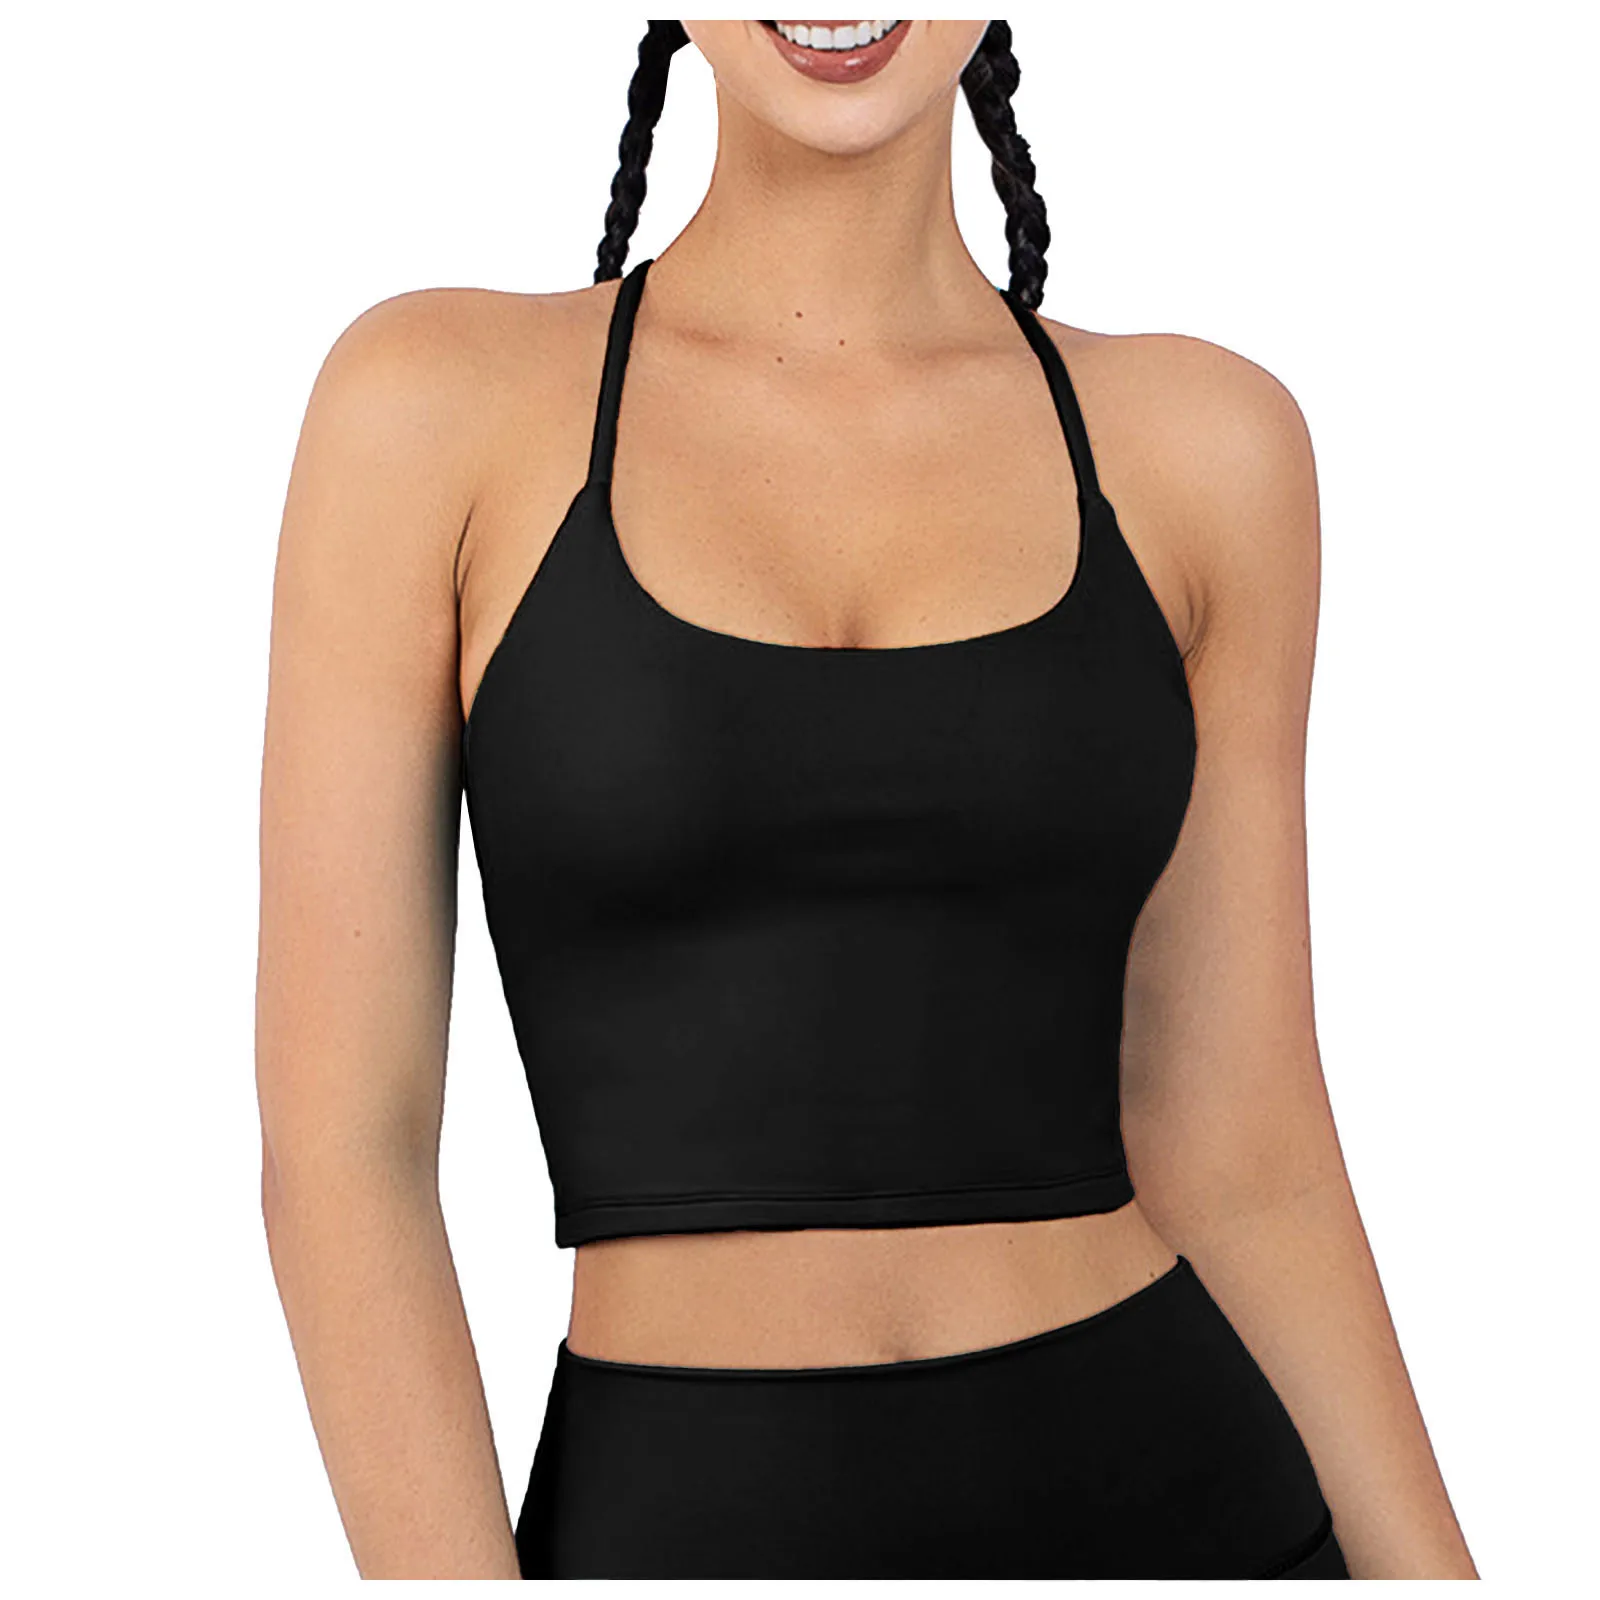 

Women'S Sports Bra Push Up Bralette Brassiere Padded Cross Back Backless Sports Bra Crop Top For Yoga Fitness Intimate Camisole